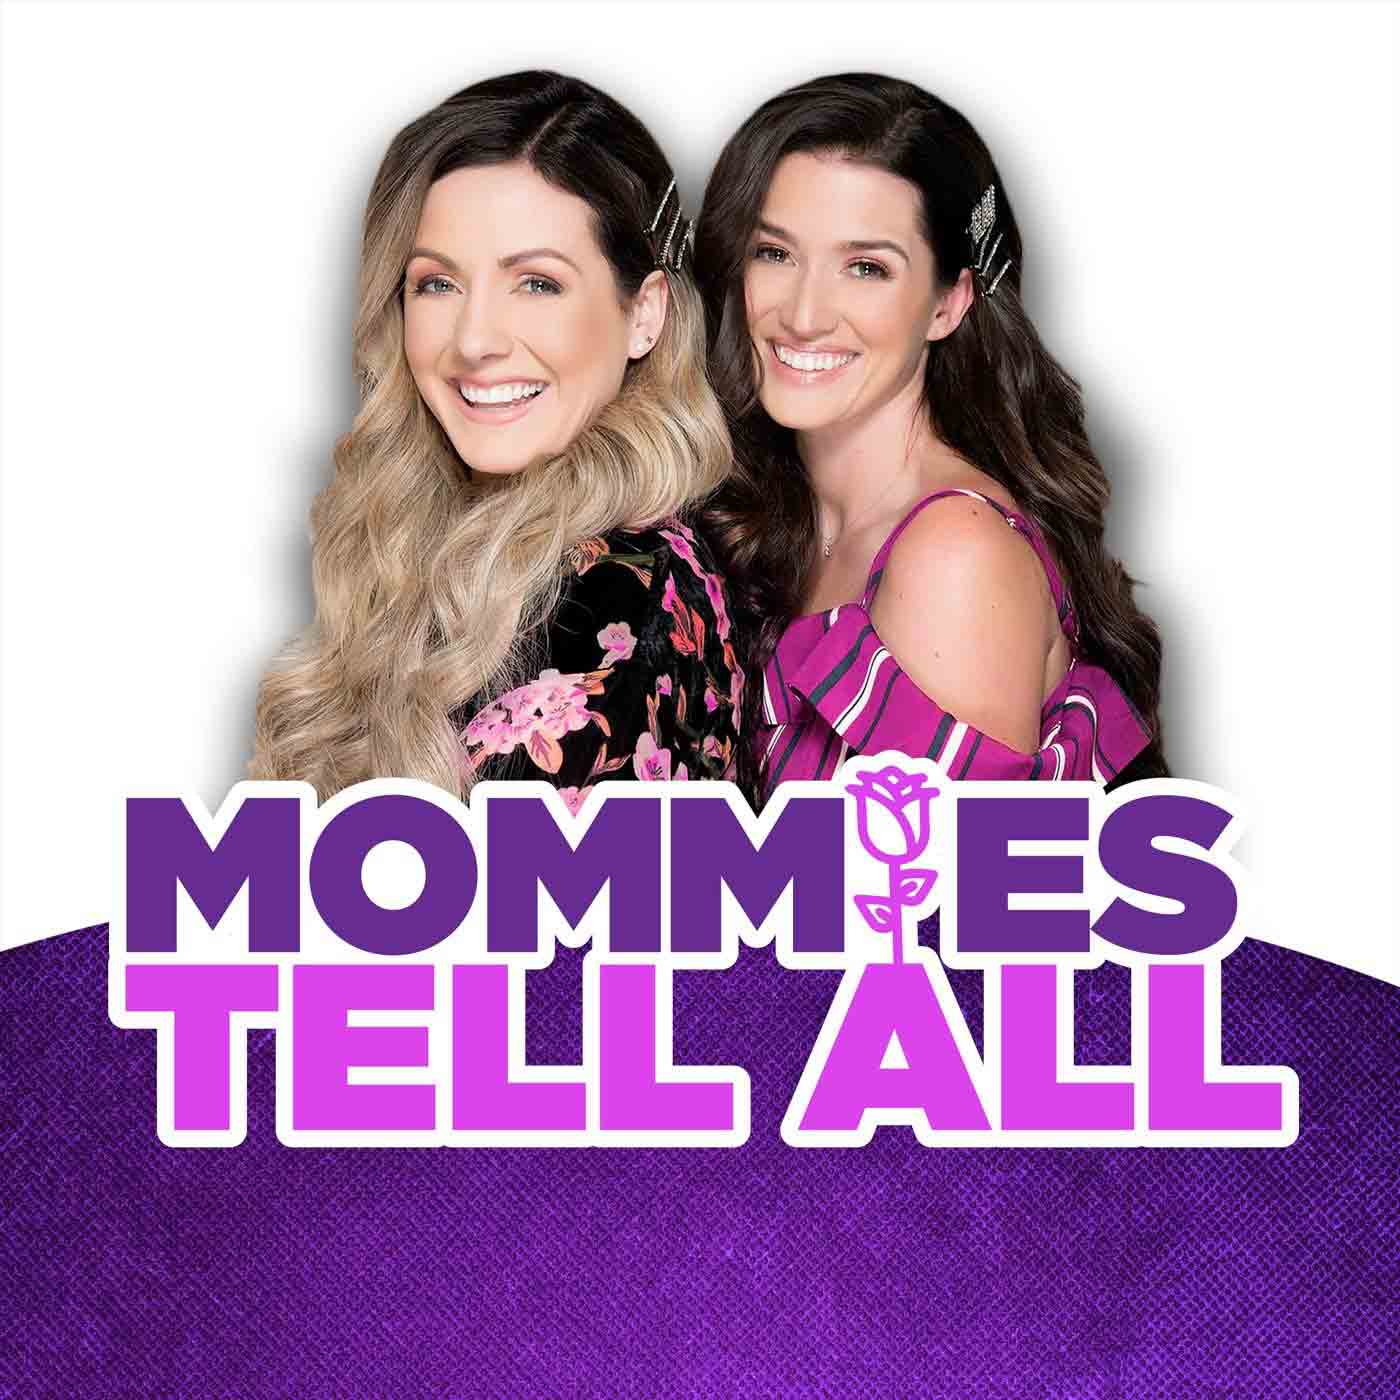 THE BACHELOR’S CARLY WADDELL AND JADE ROPER JOIN WESTWOOD ONE PODCAST NETWORK WITH “MOMMIES TELL ALL”